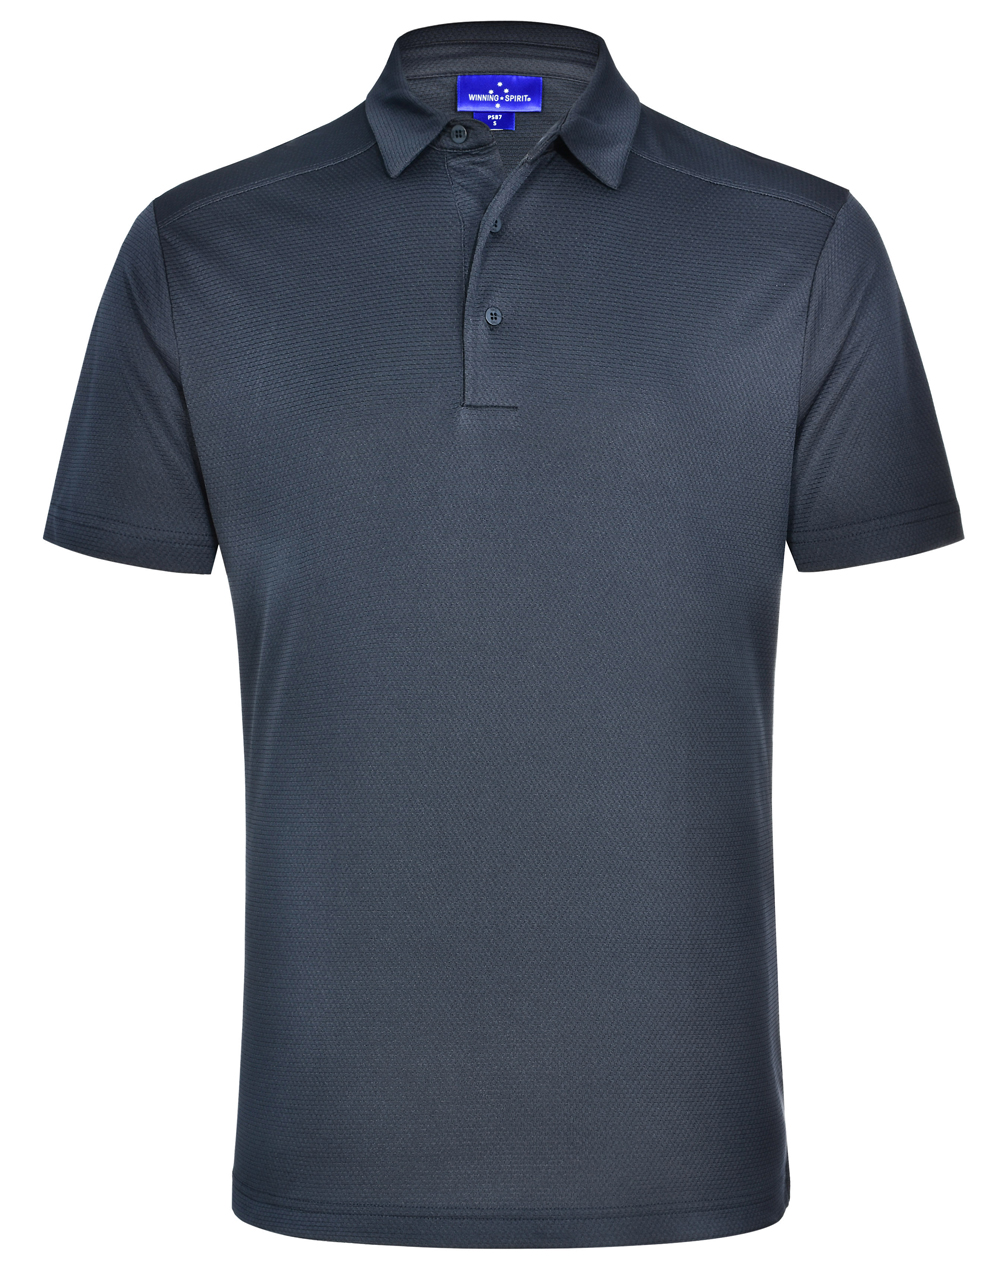 PS87 BAMBOO CHARCOAL CORPORATE SHORT SLEEVE POLO Men’s